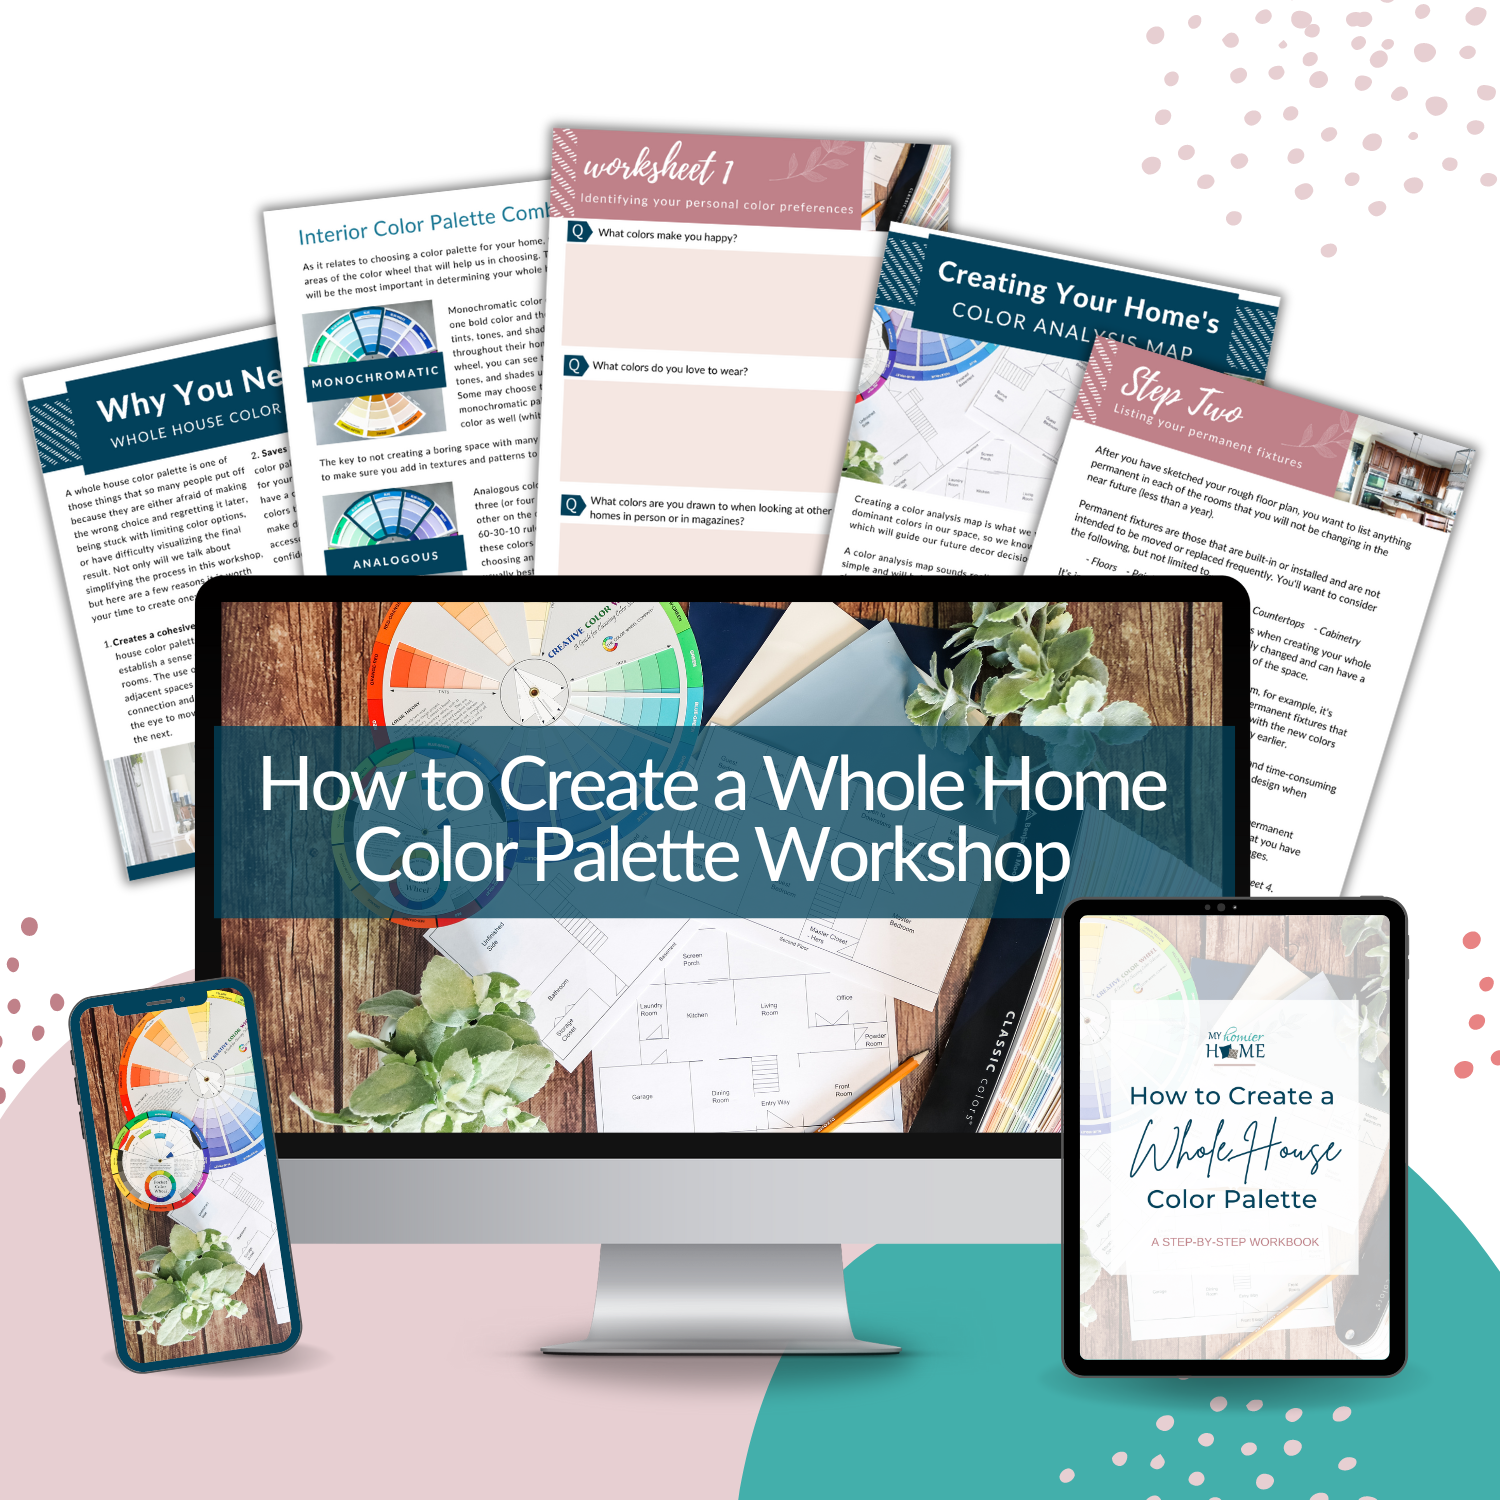 In this My Homier Home workshop, you will learn how to create a cohesive color scheme for your whole home. We will explore the concept of color coordination and teach you techniques to develop a stunning whole home color palette in the How to Create a Whole Home Color Palette Workshop.